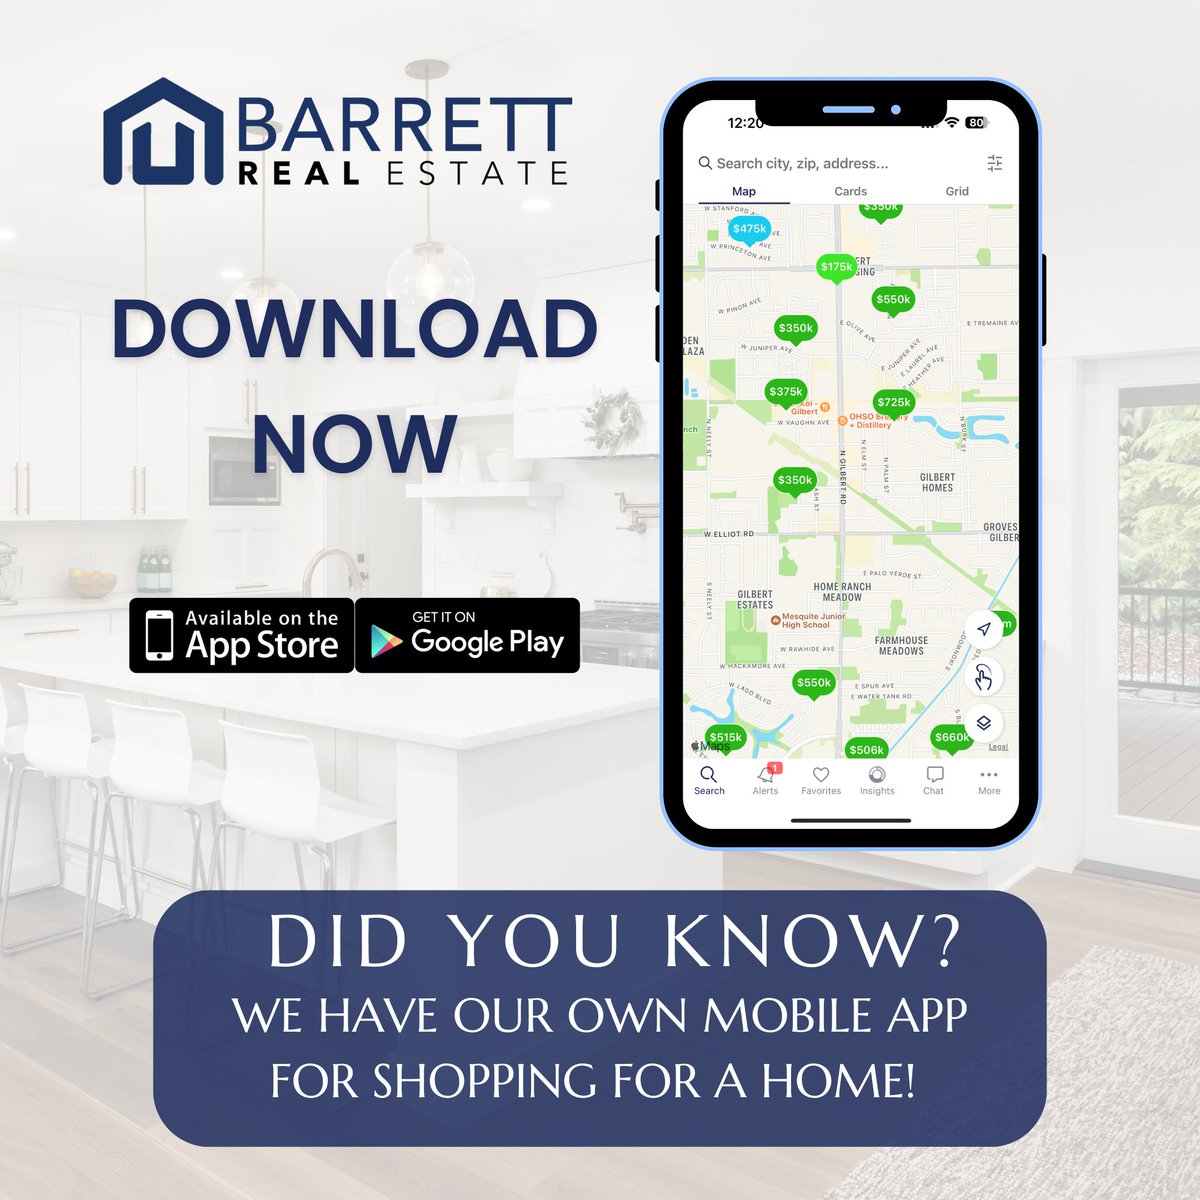 🏡🔍 Looking for your dream home? 📱 Browse listings, schedule viewings, and connect with your agent seamlessly. Reach out to your agent today for access or download it from the App Store! #BarrettRealEstate #HomeSearch #MobileApp